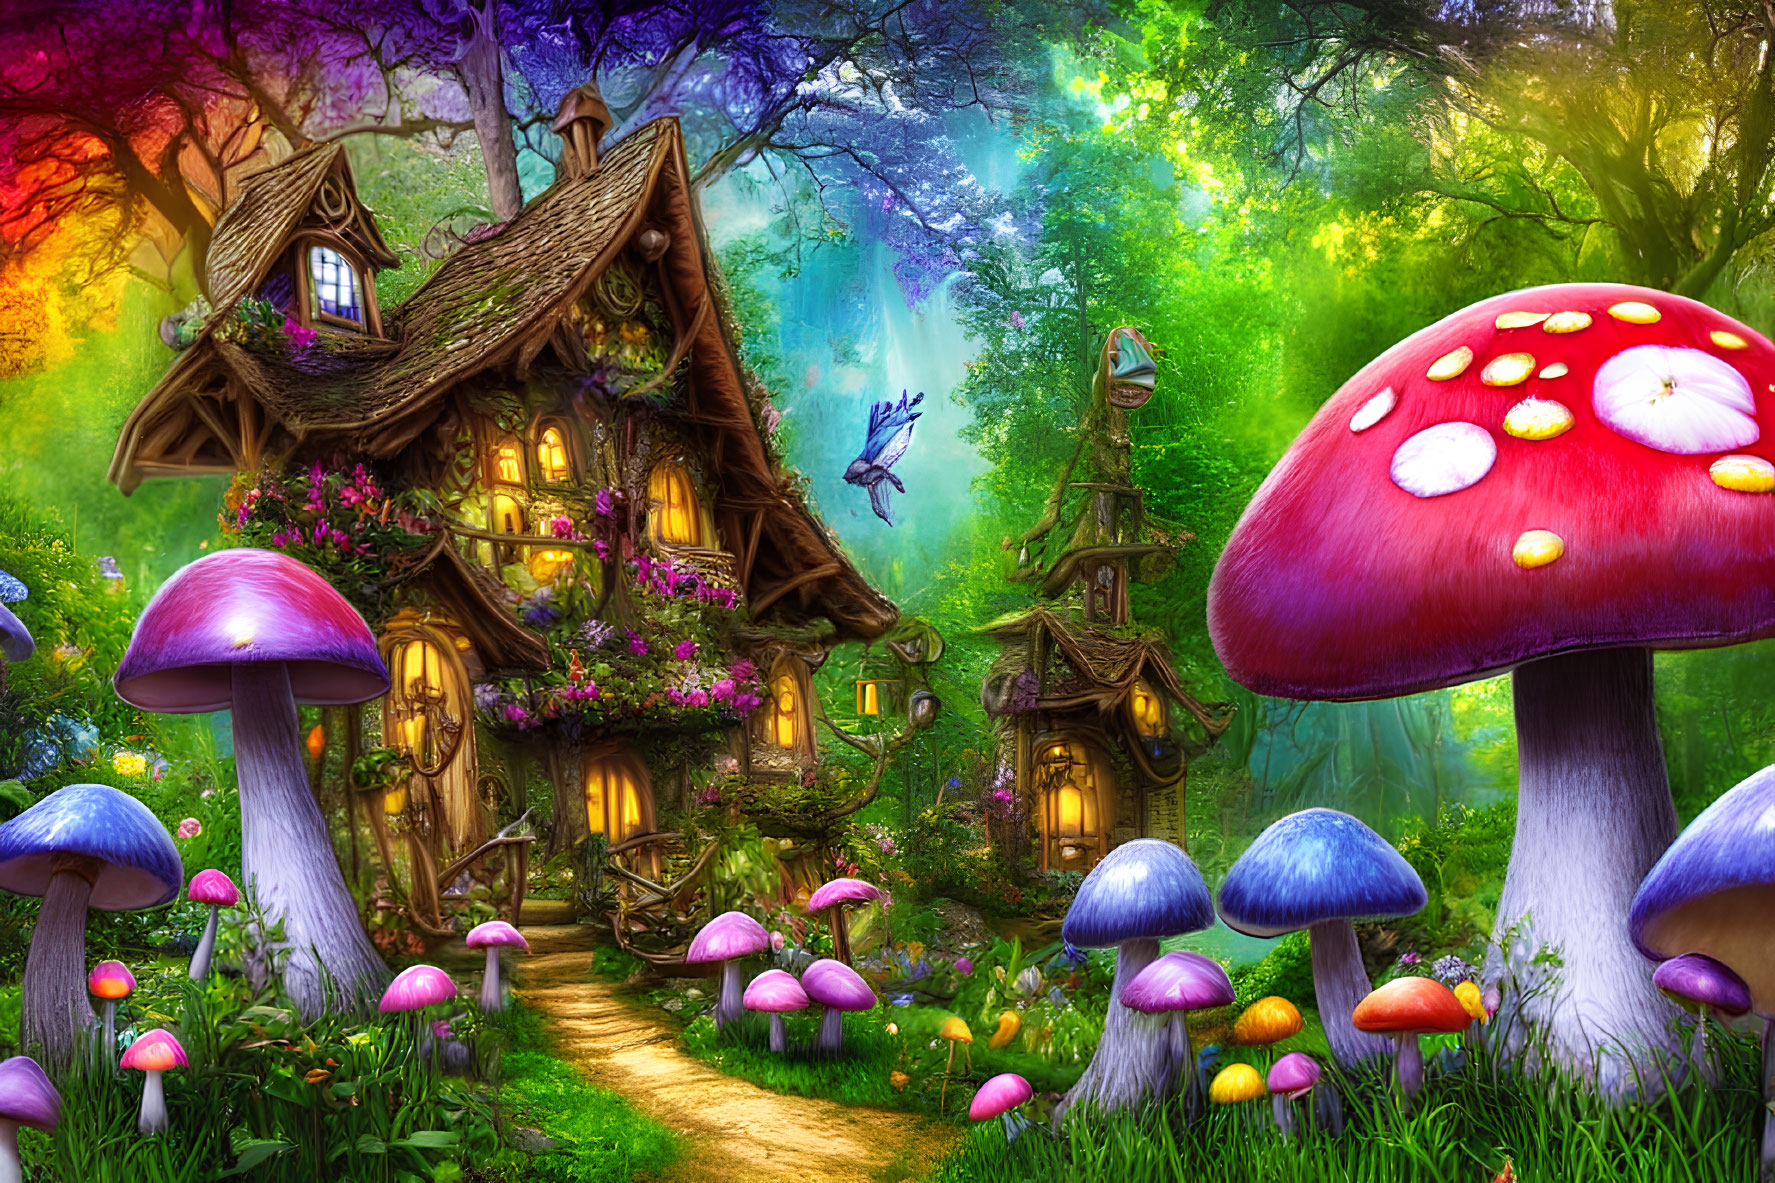 Whimsical enchanted forest with mushroom house and vibrant flora